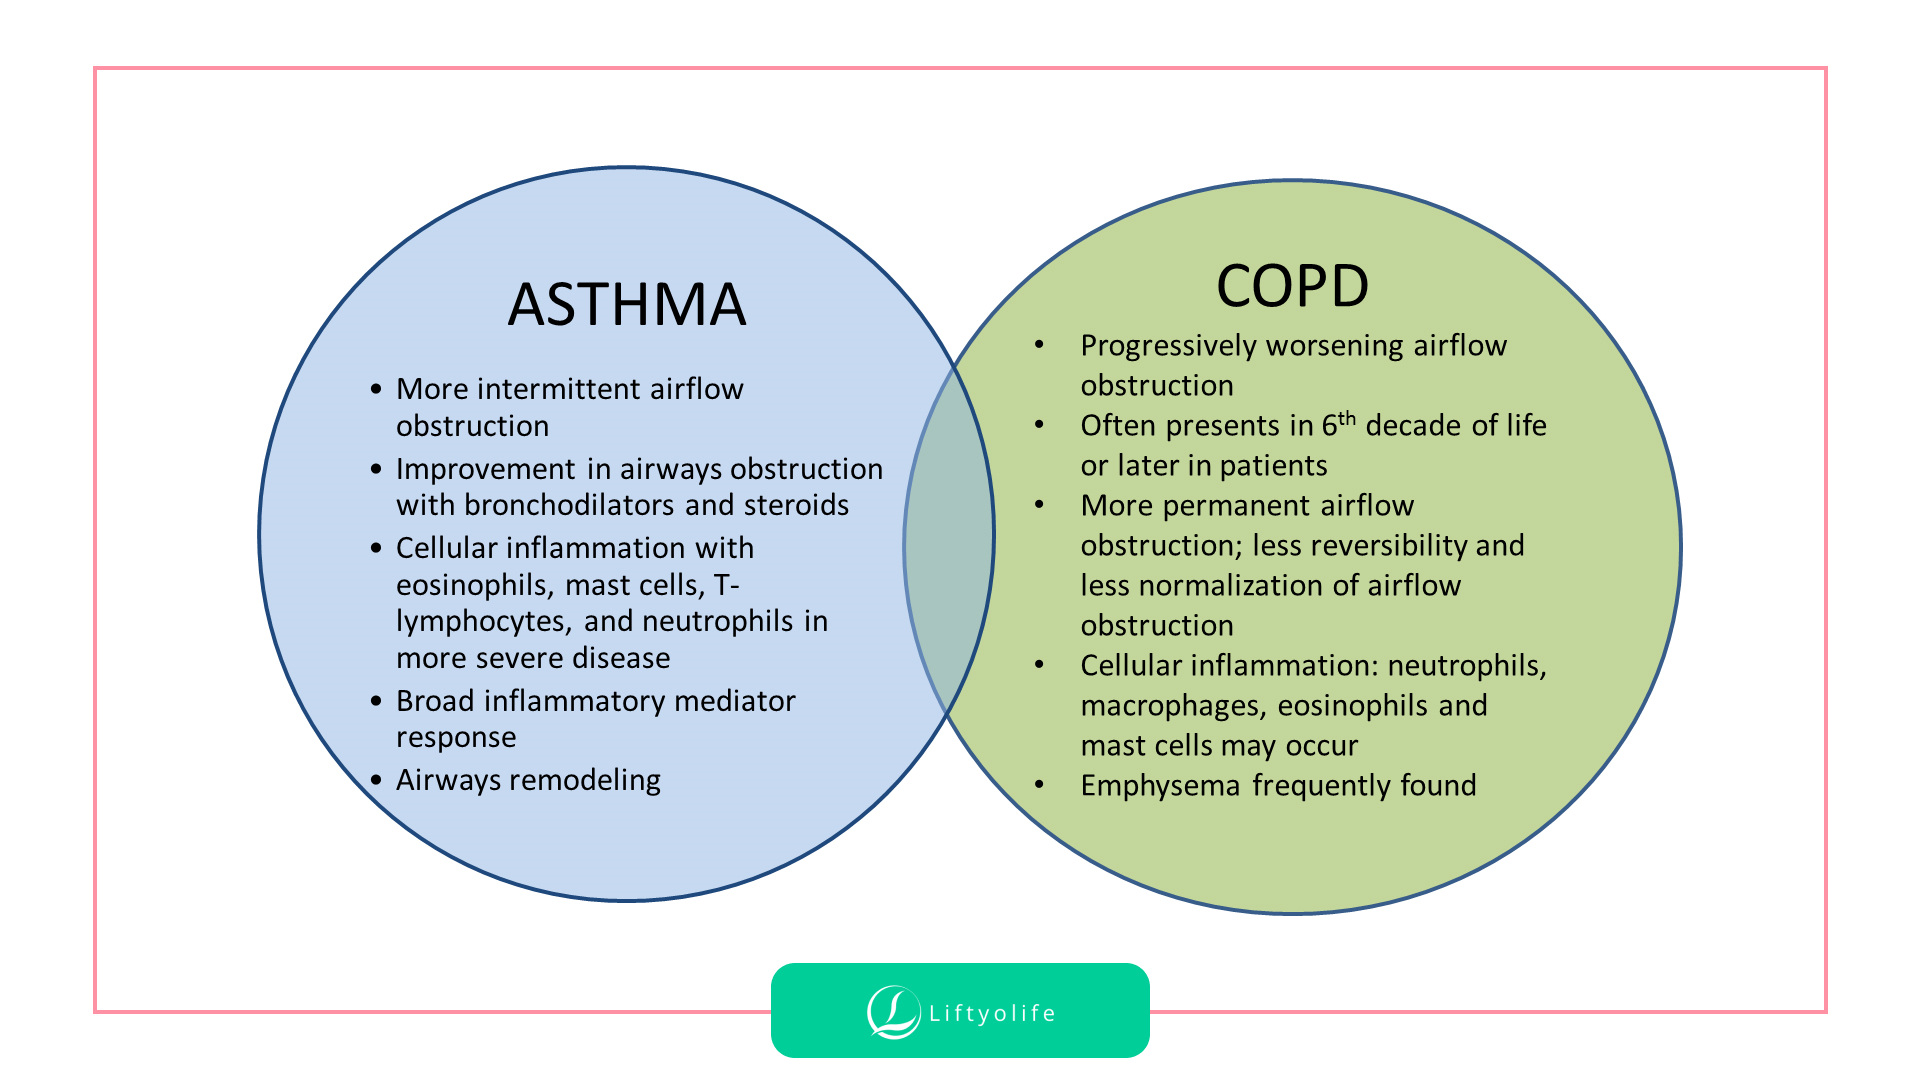 Symptoms and signs of asthma vs COPD